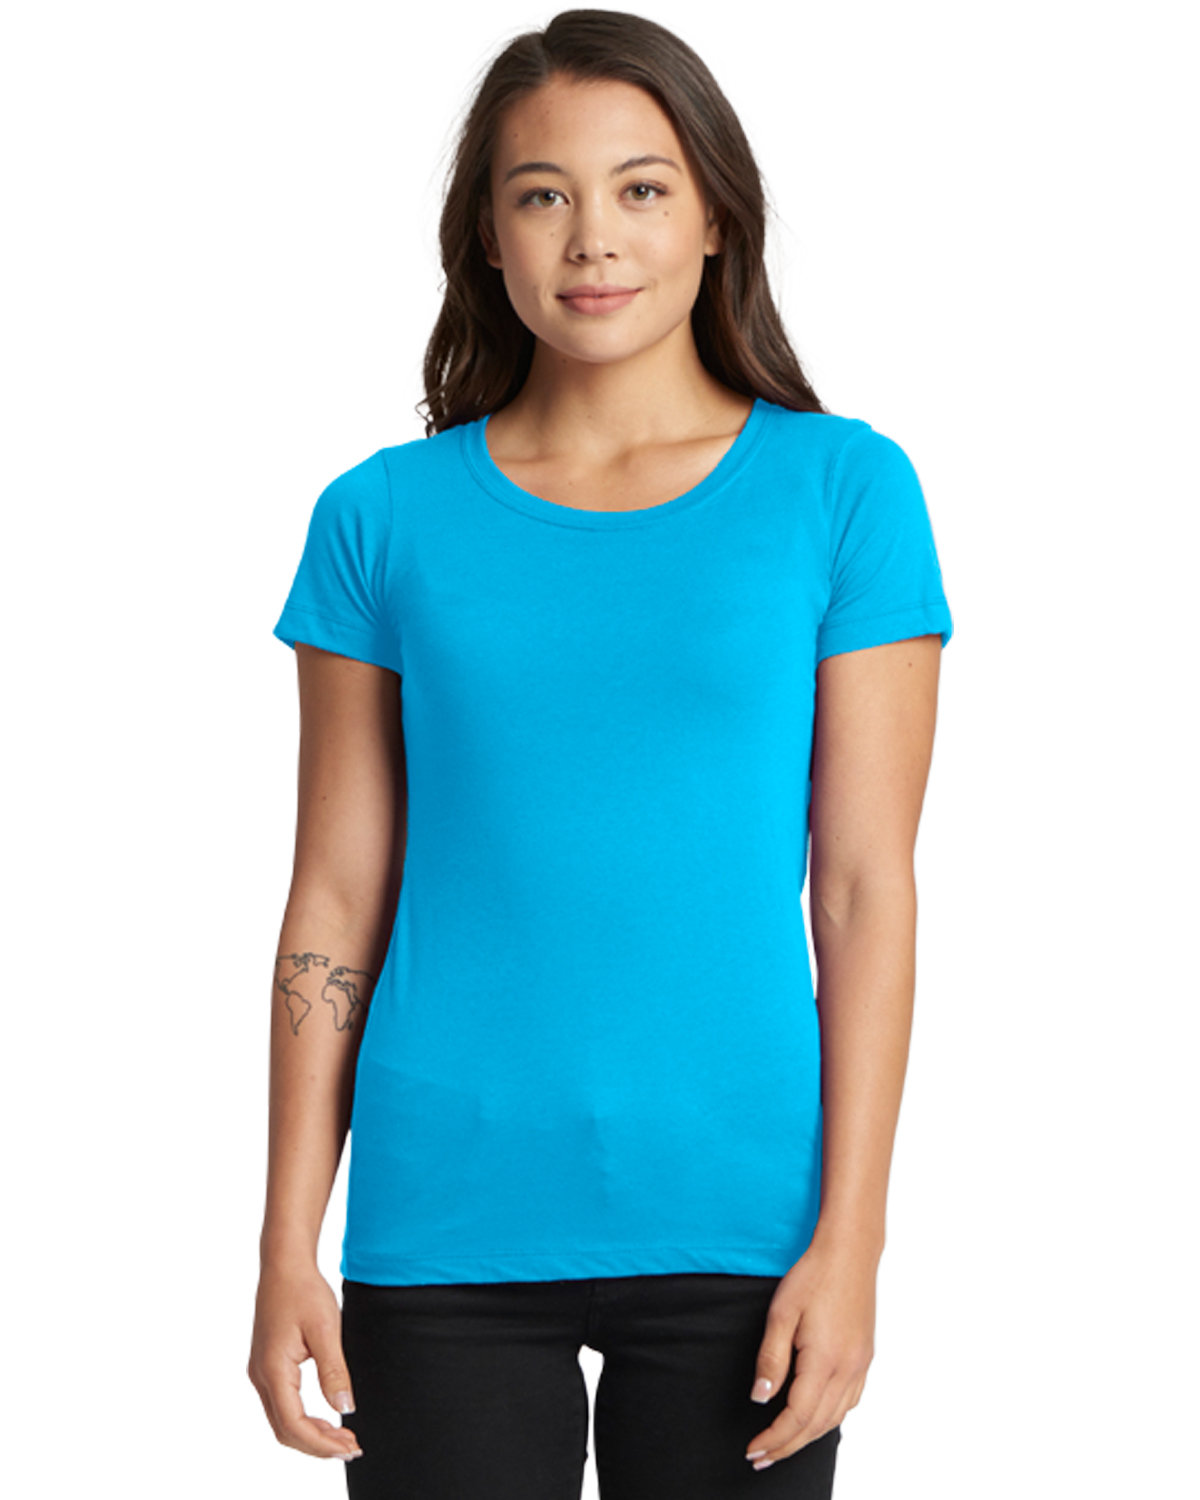 Next Level Apparel Ladies' Ideal T-Shirt TURQUOISE 